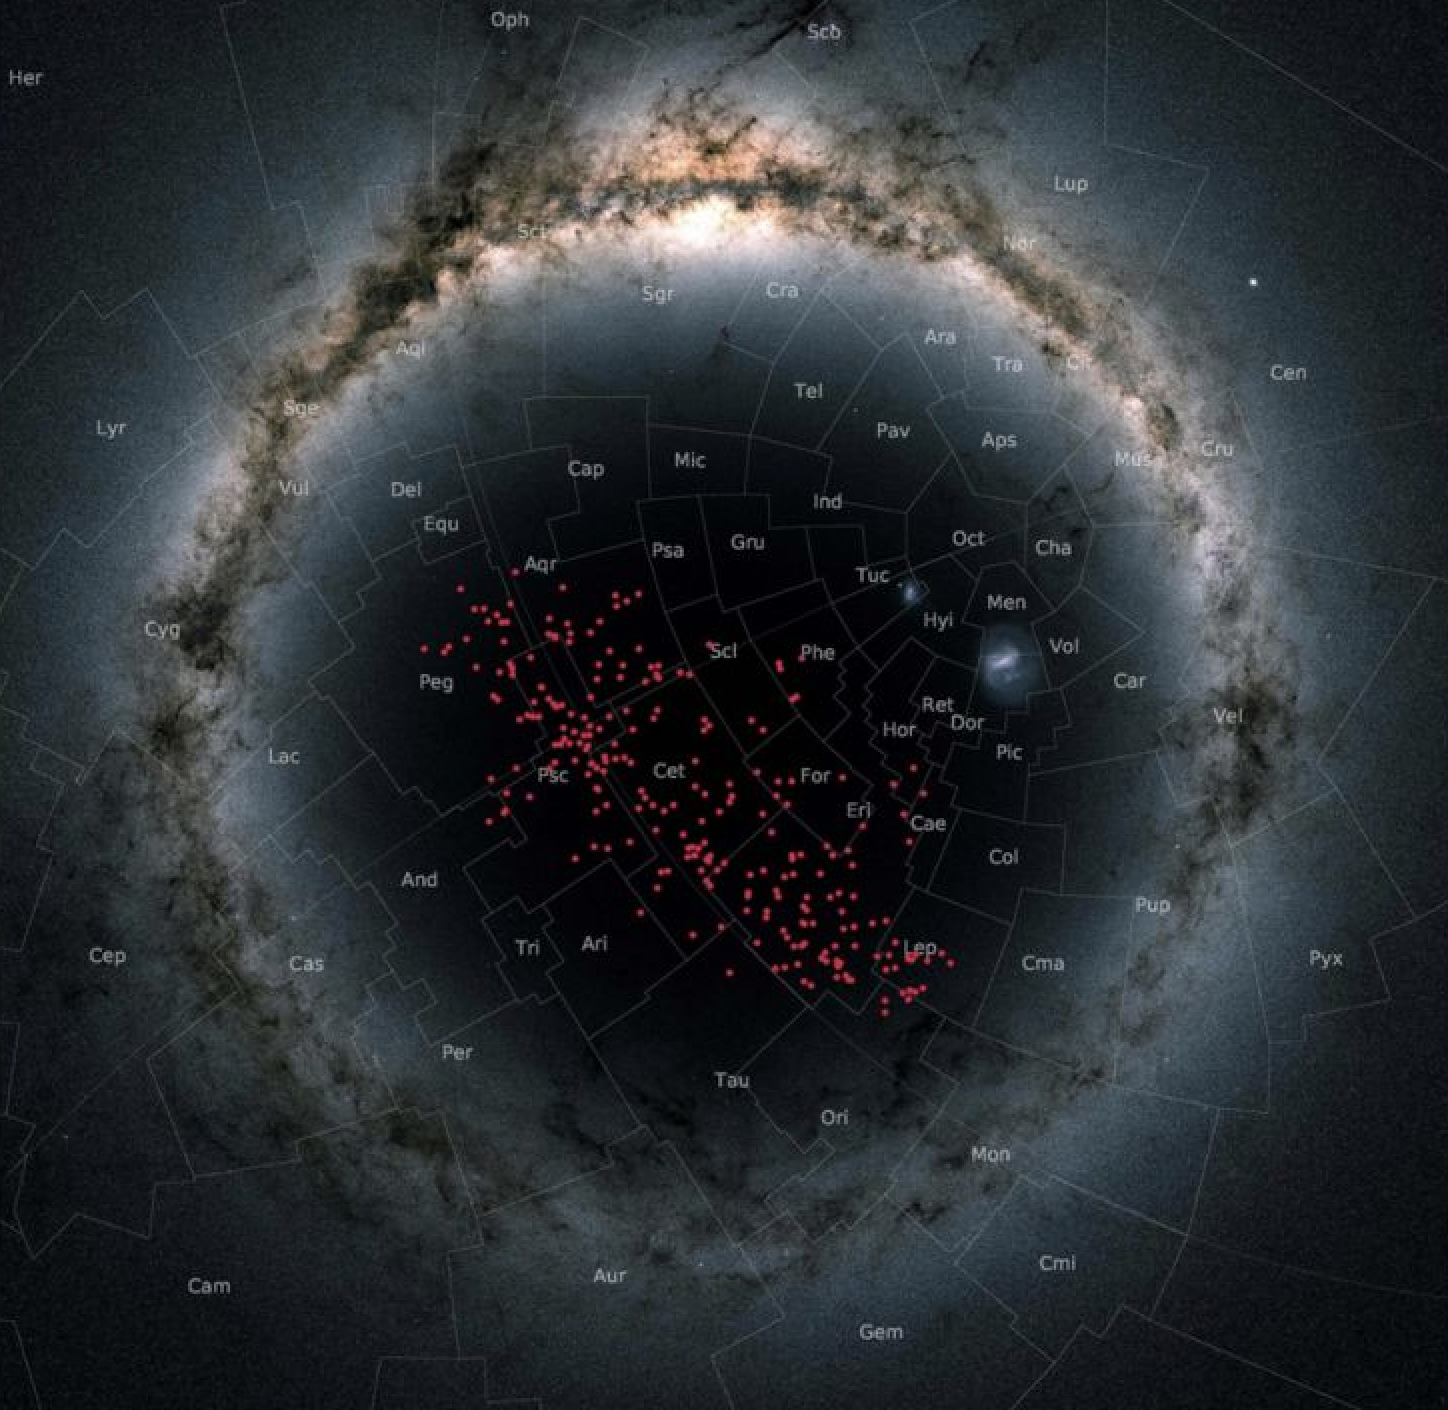 Astronomers found a stream of thousands of stars hiding in the Milky Way